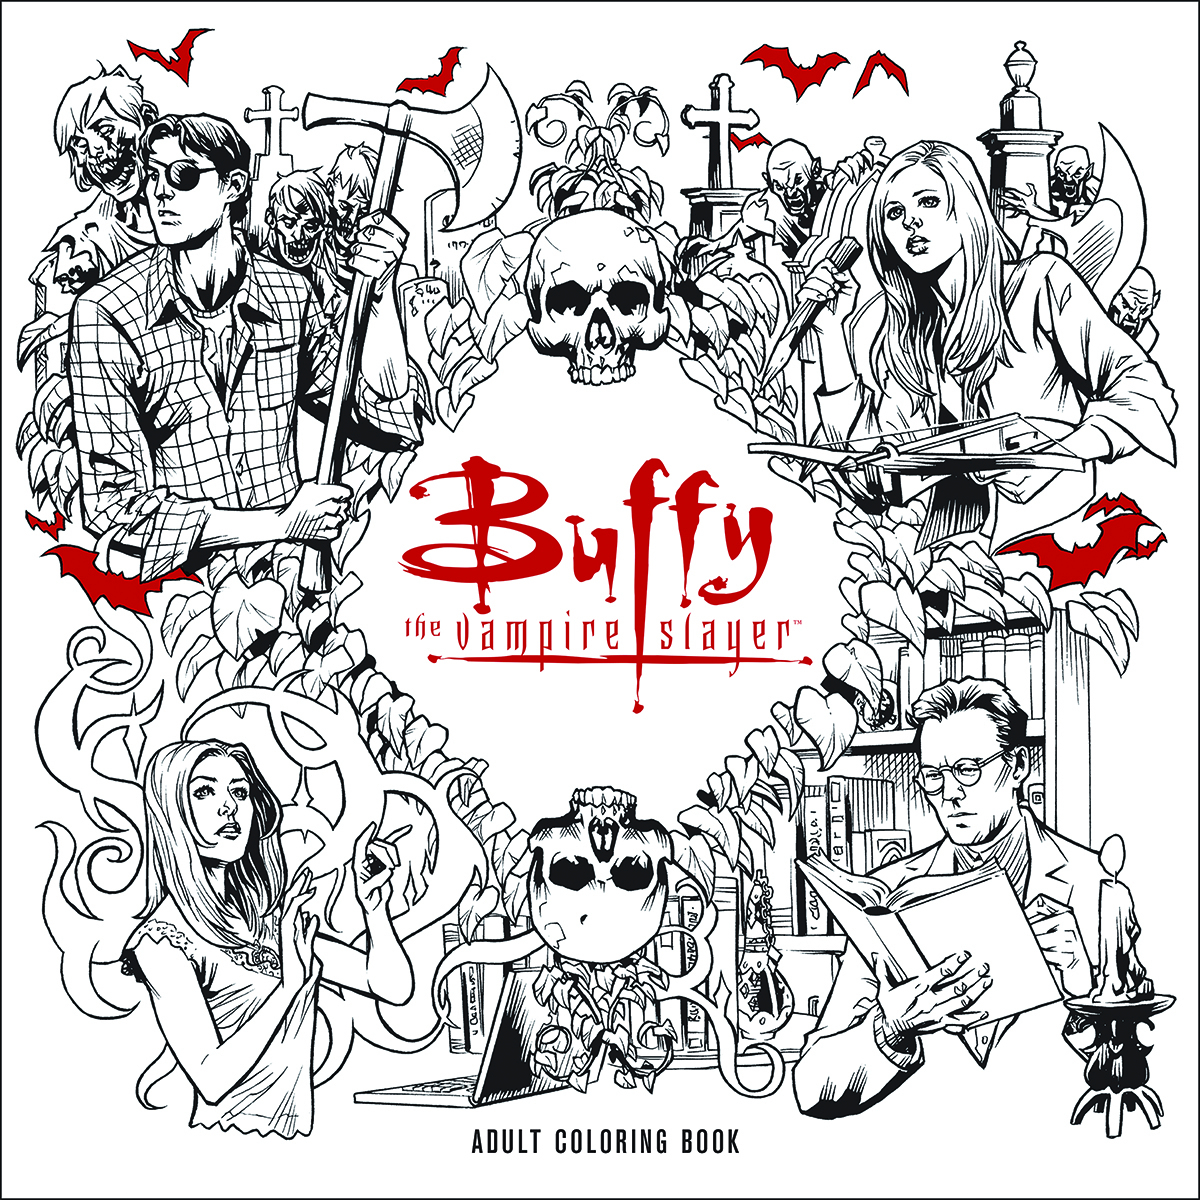 BTVS ADULT COLORING BOOK TP